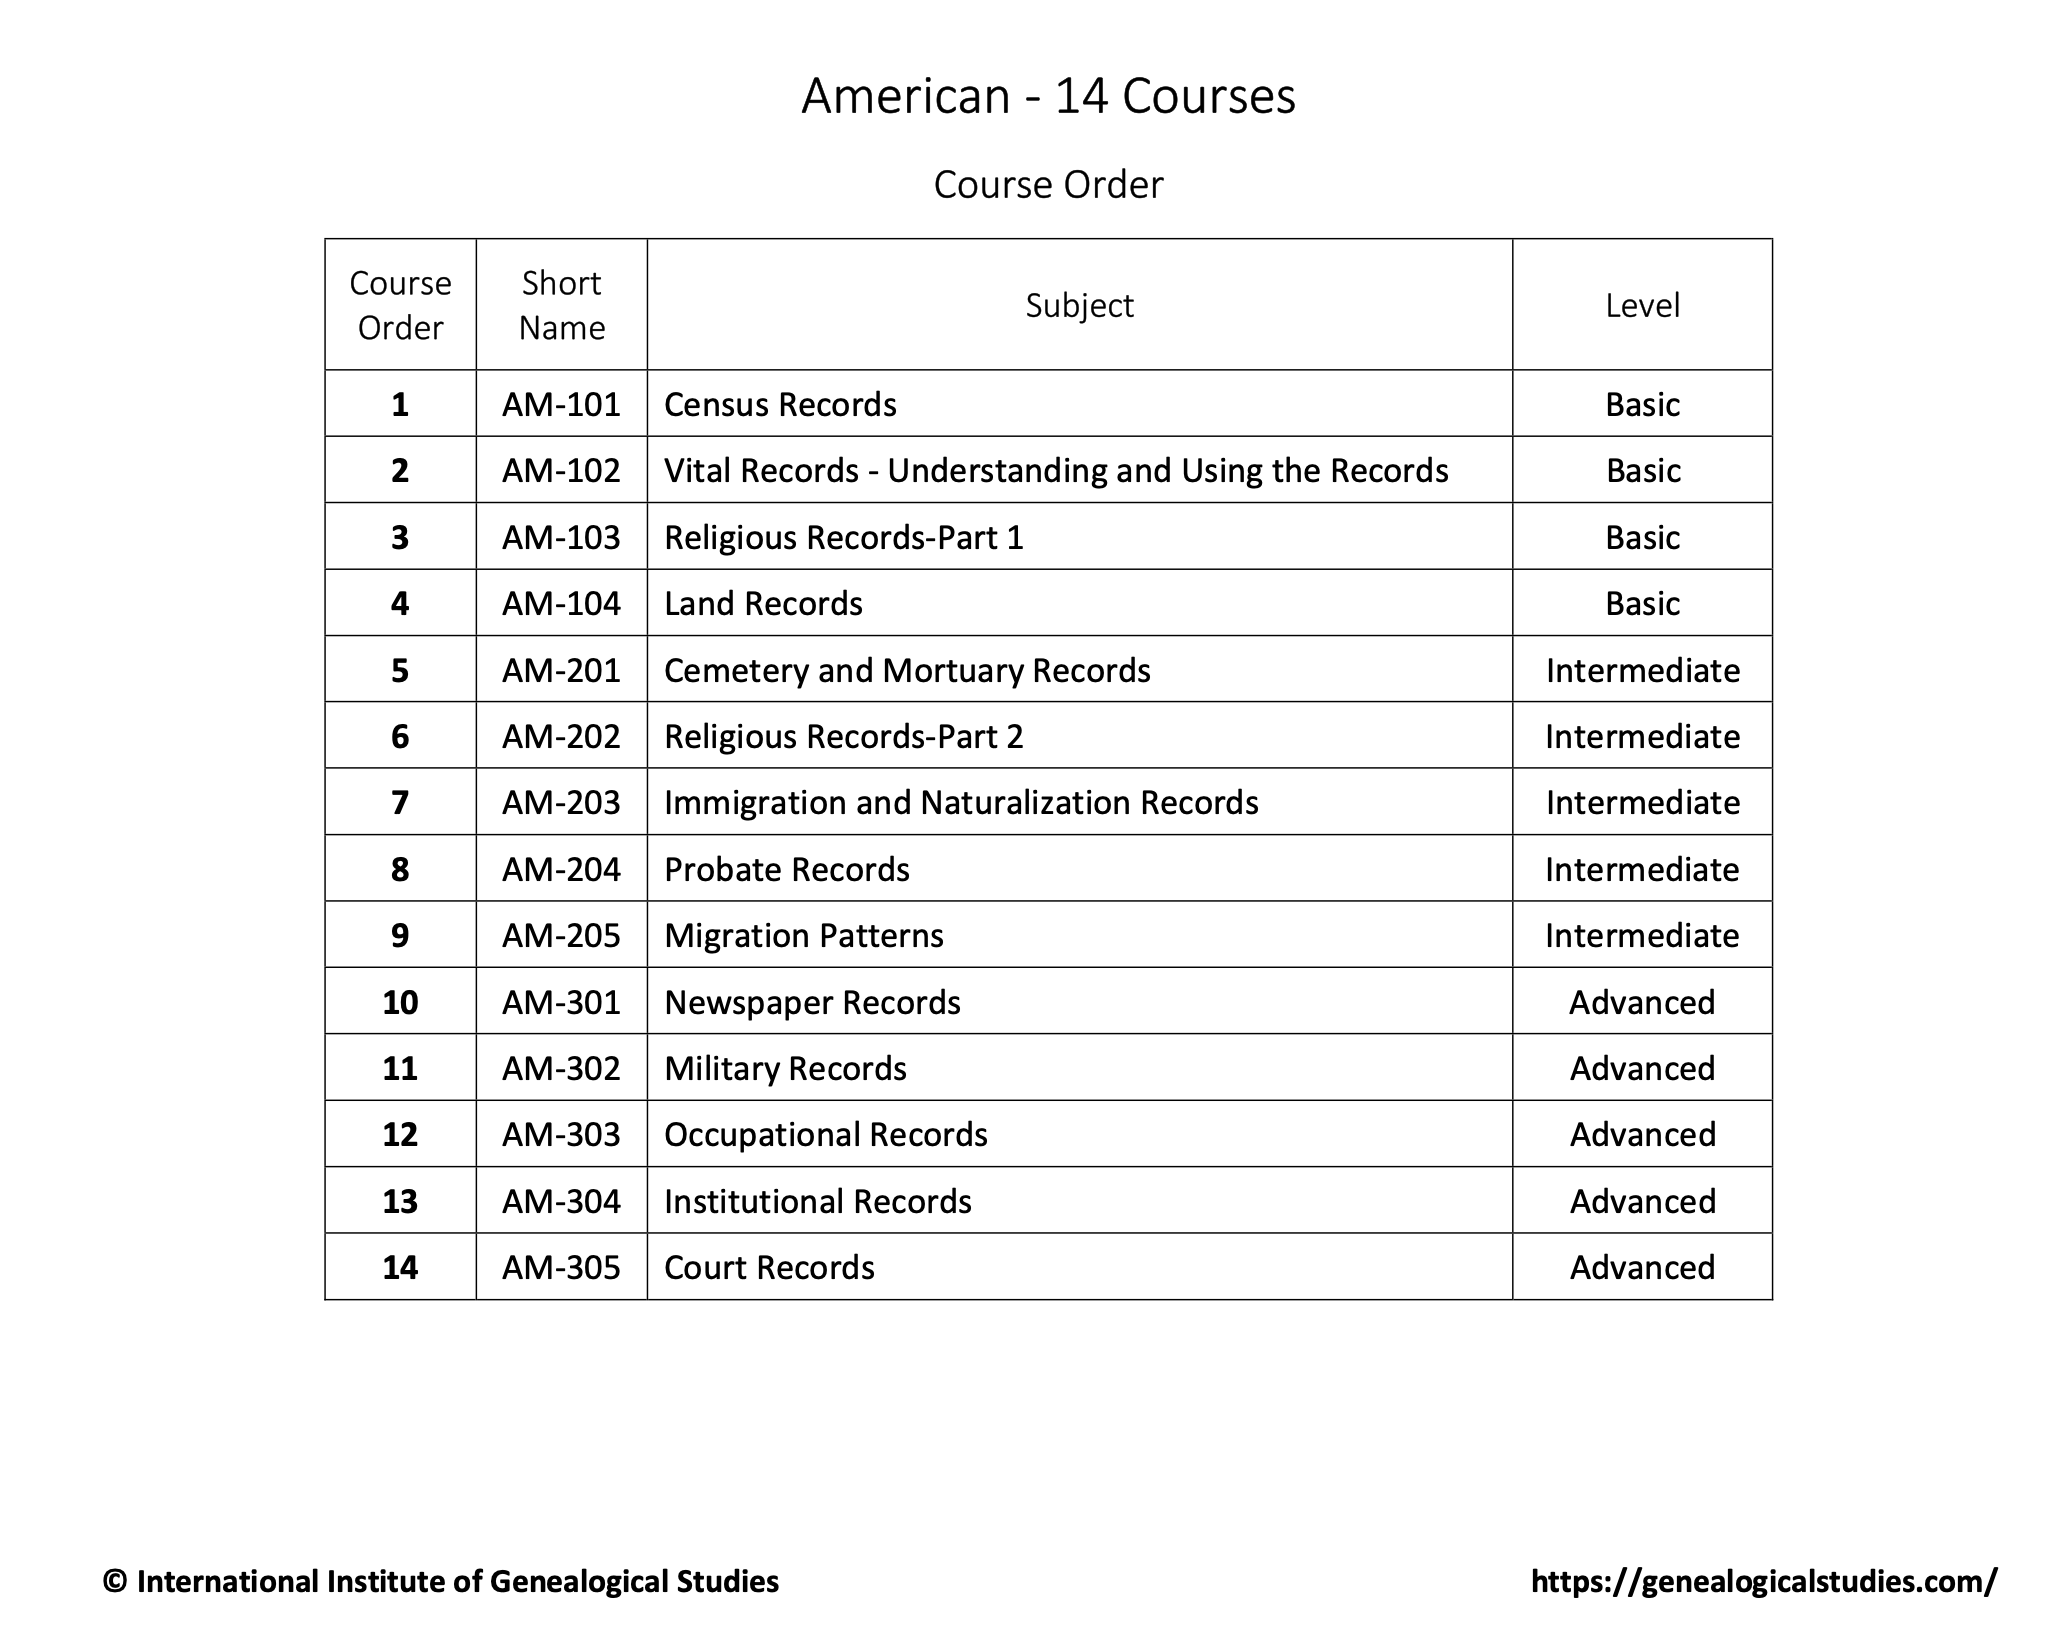 American course order